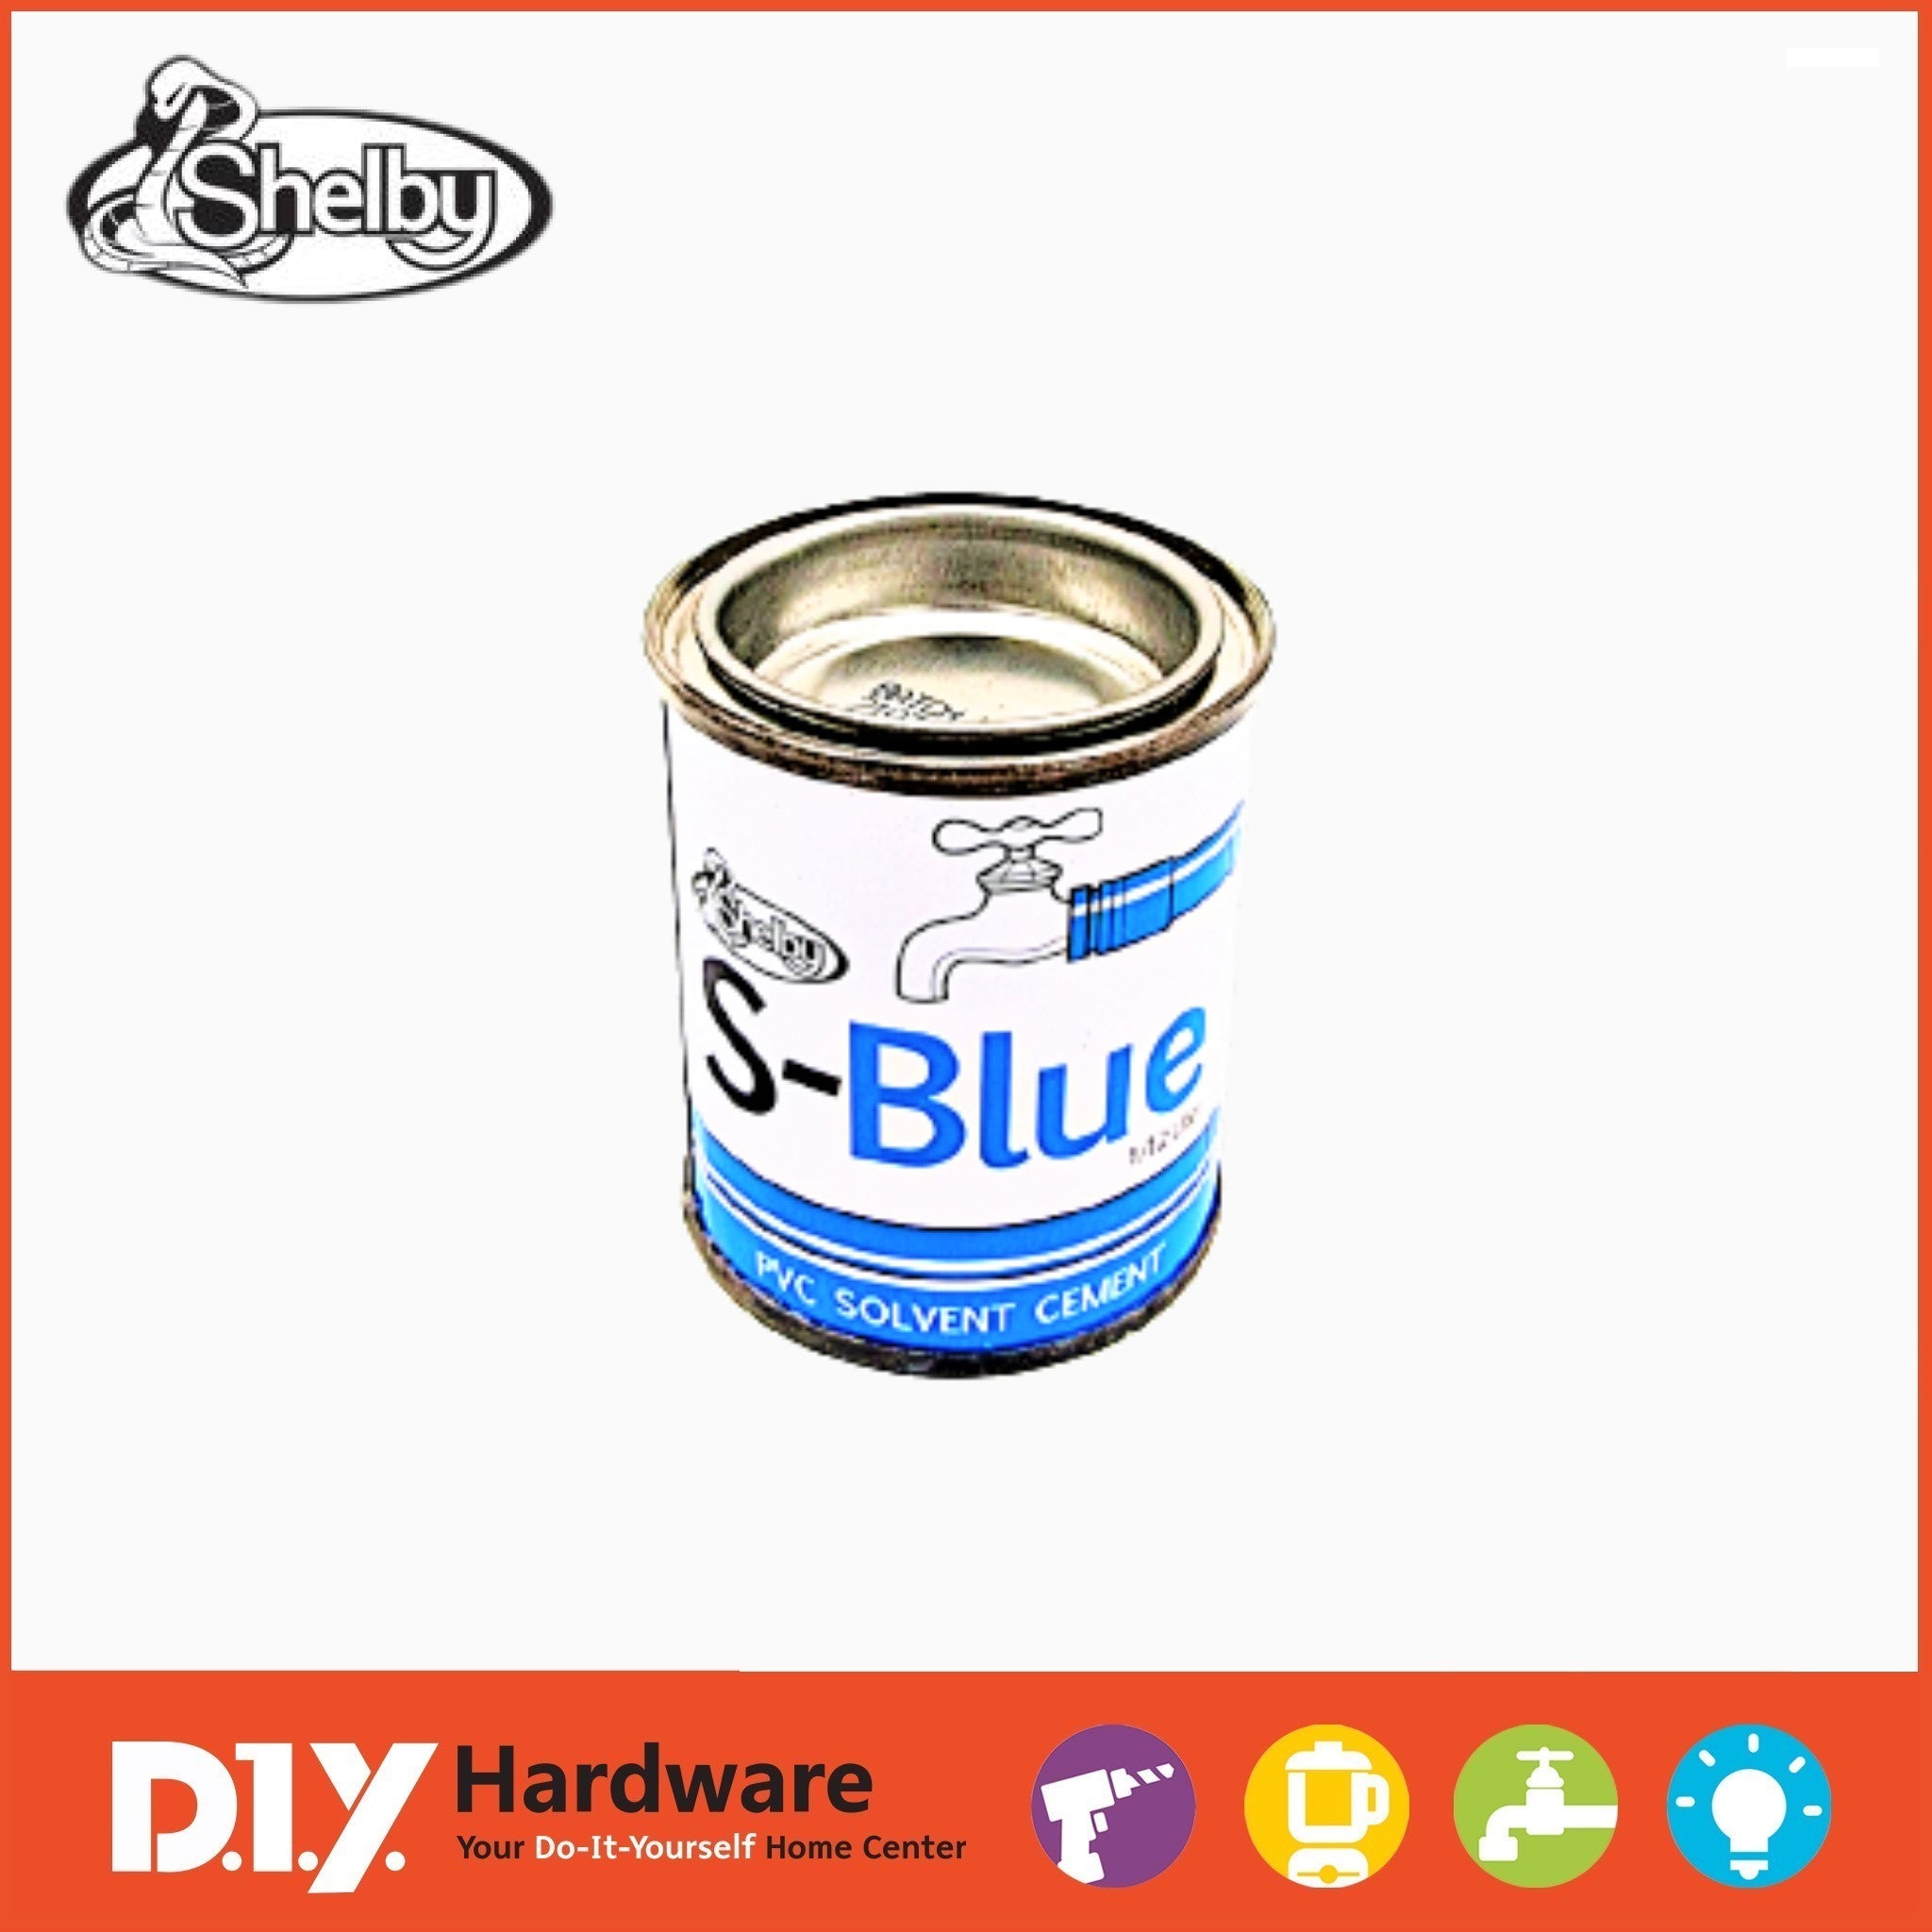 Buy Shelby S-Blue 1/12L Solvent Cement Online - DIY Hardware